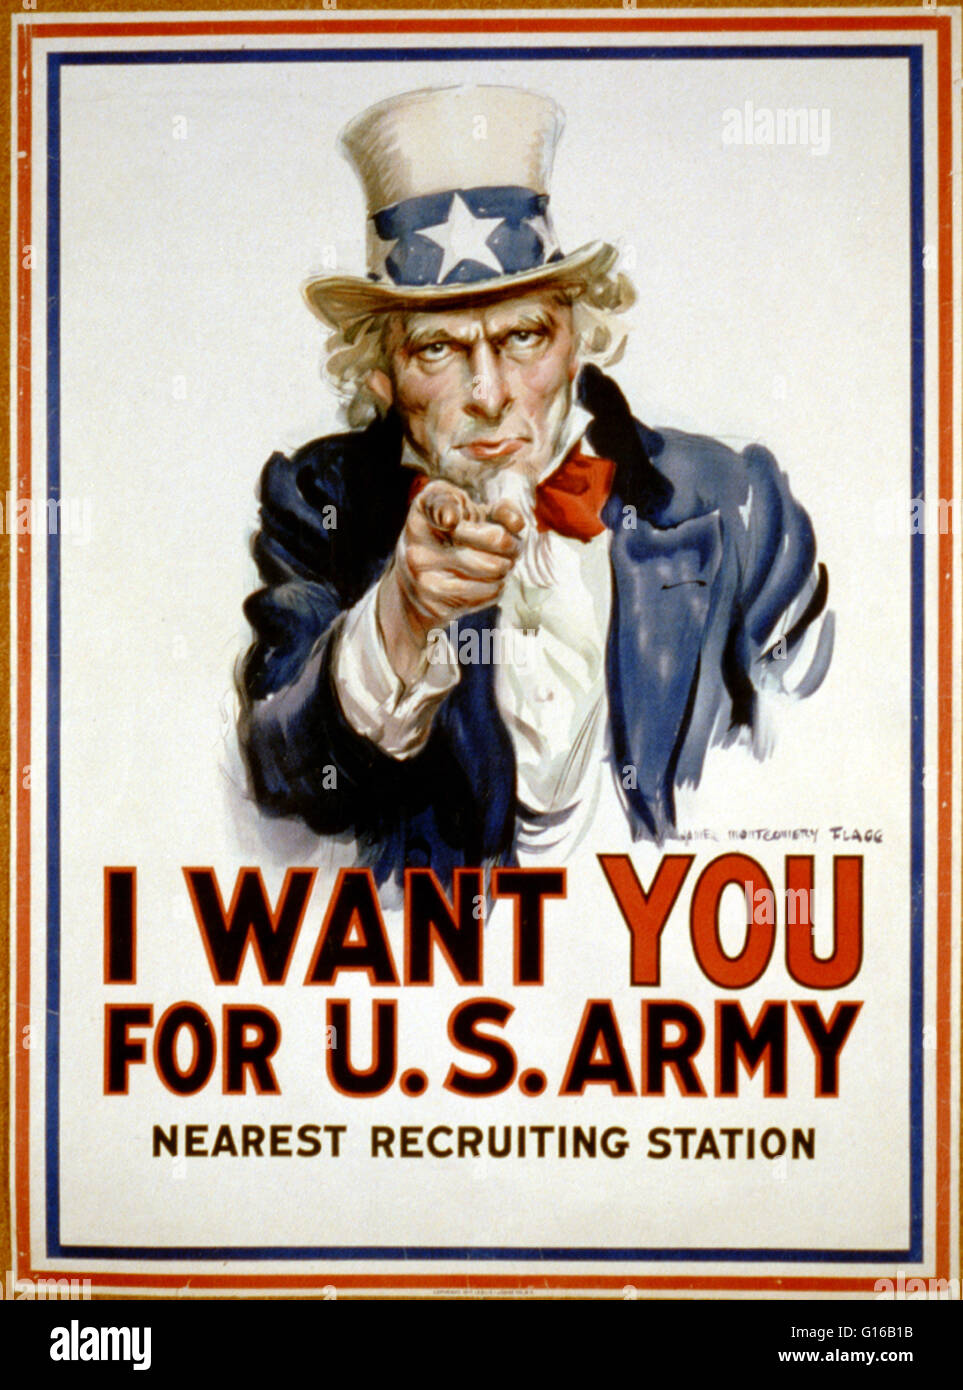 Poster for 'I want you for U. S. Army' shows Uncle Sam pointing his finger at the viewer in order to recruit soldiers for the American Army during World War I. The printed phrase 'Nearest recruiting station' has a blank space below to add the address for Stock Photo